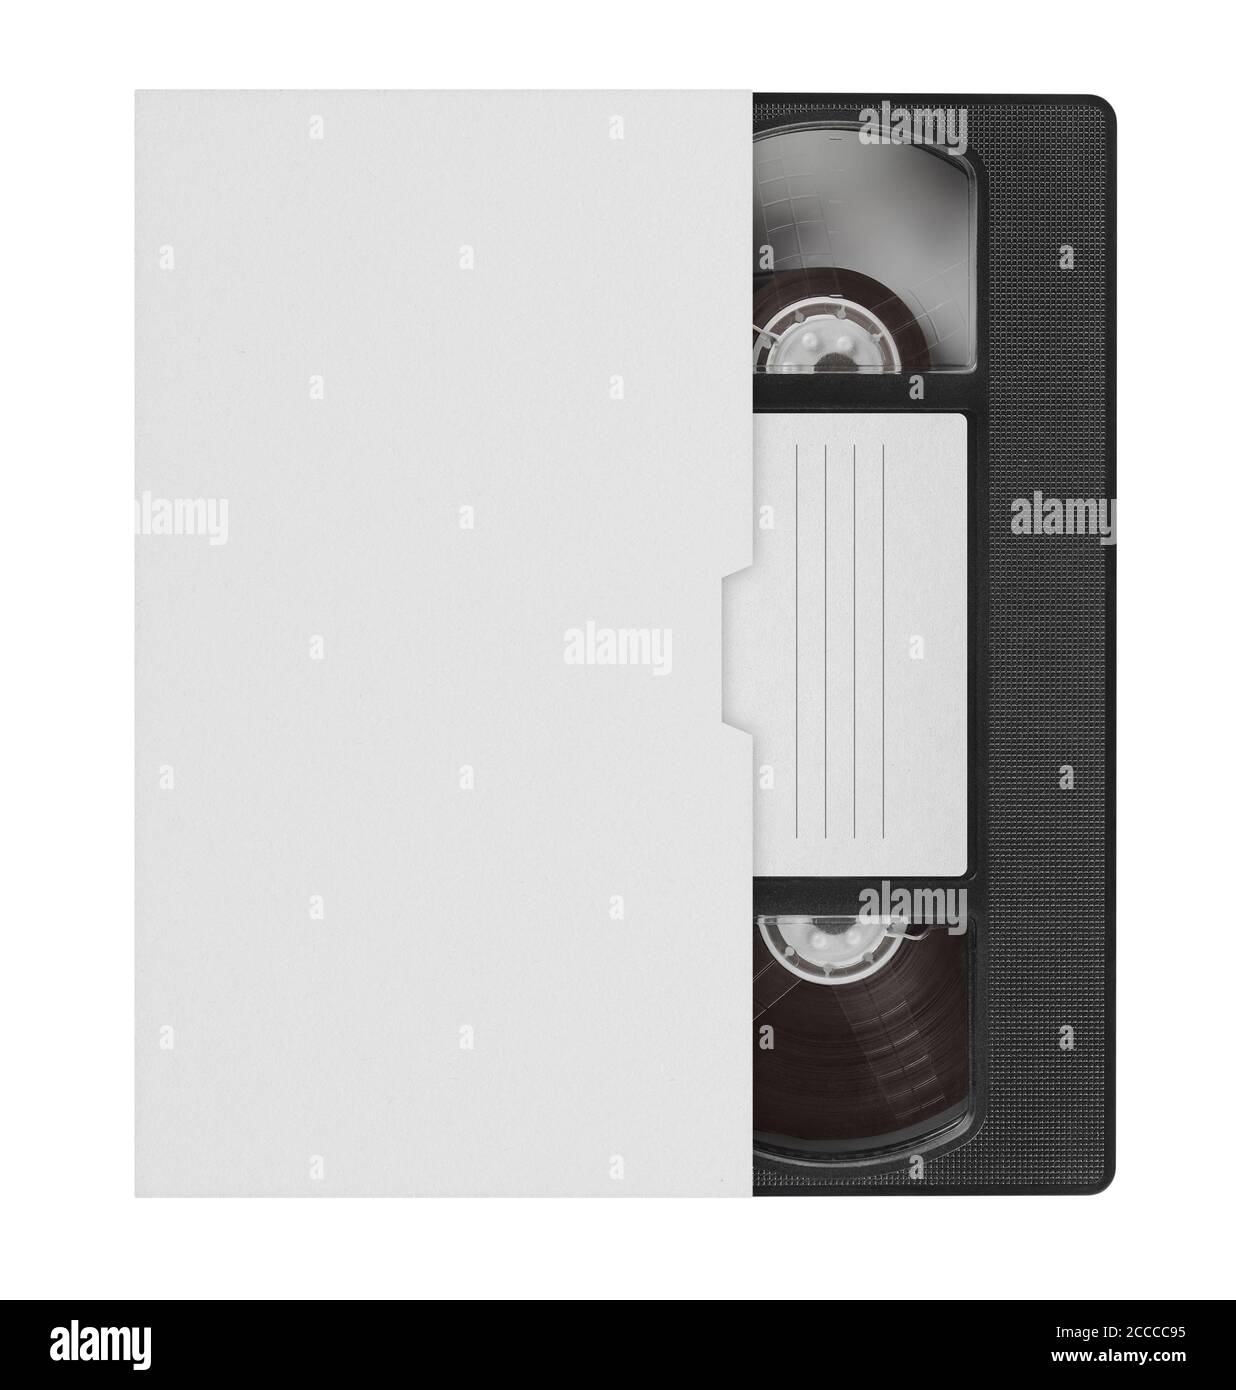 Download Blank Vhs Video Tape Mockup Analog Movie Cassette Box With Copy Space Clipping Path Stock Photo Alamy